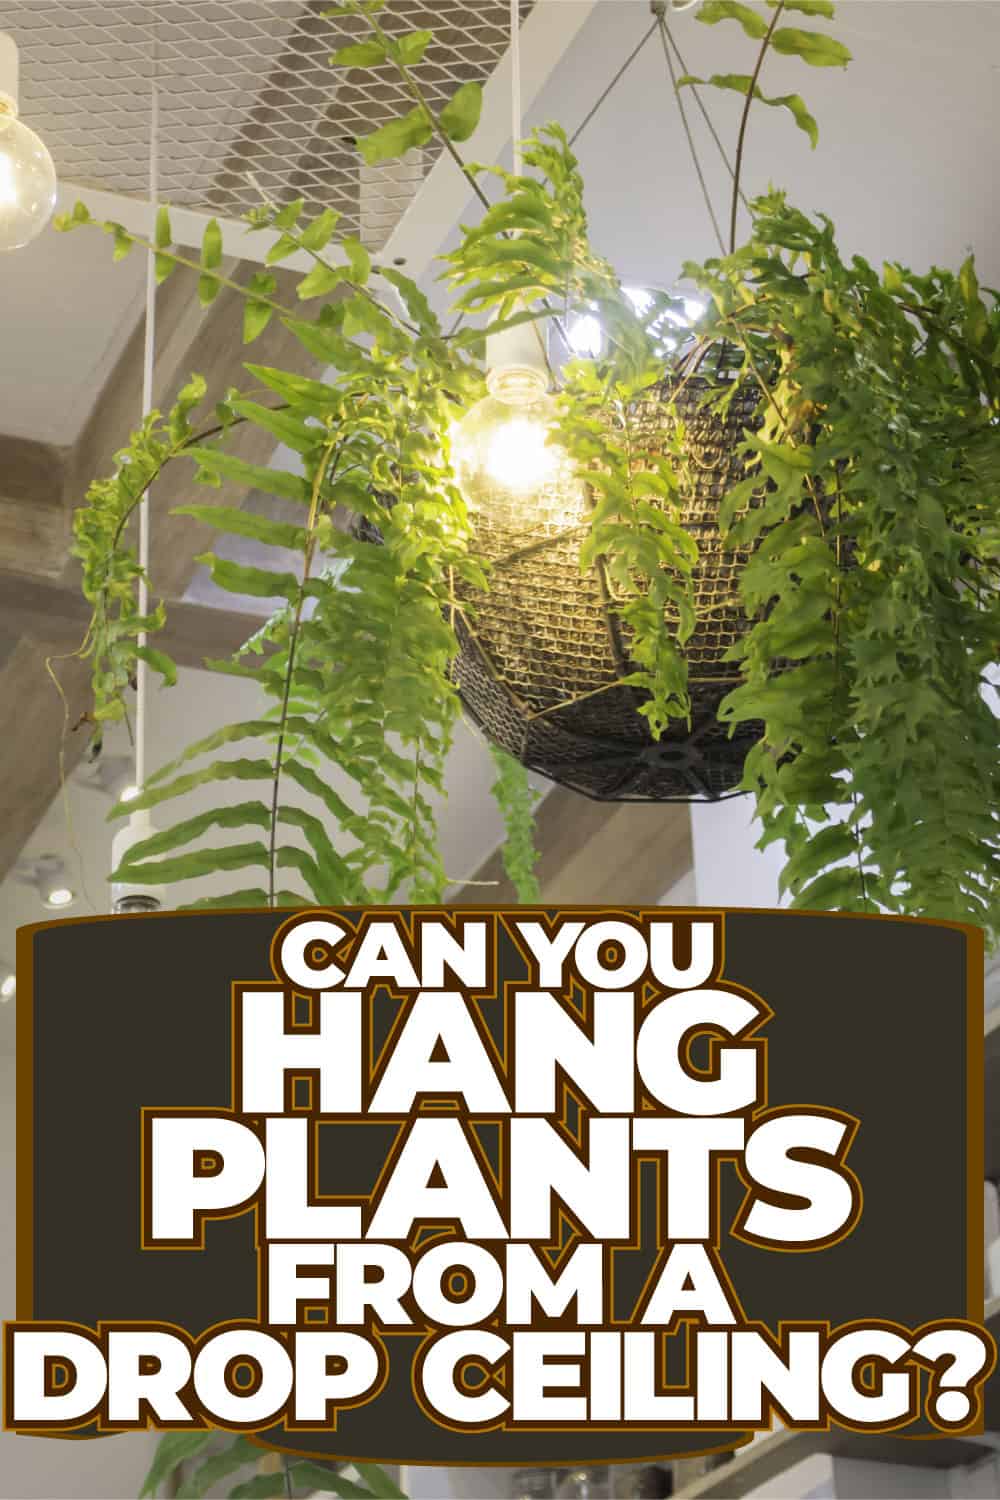 Can You Hang Plants From A Drop Ceiling?